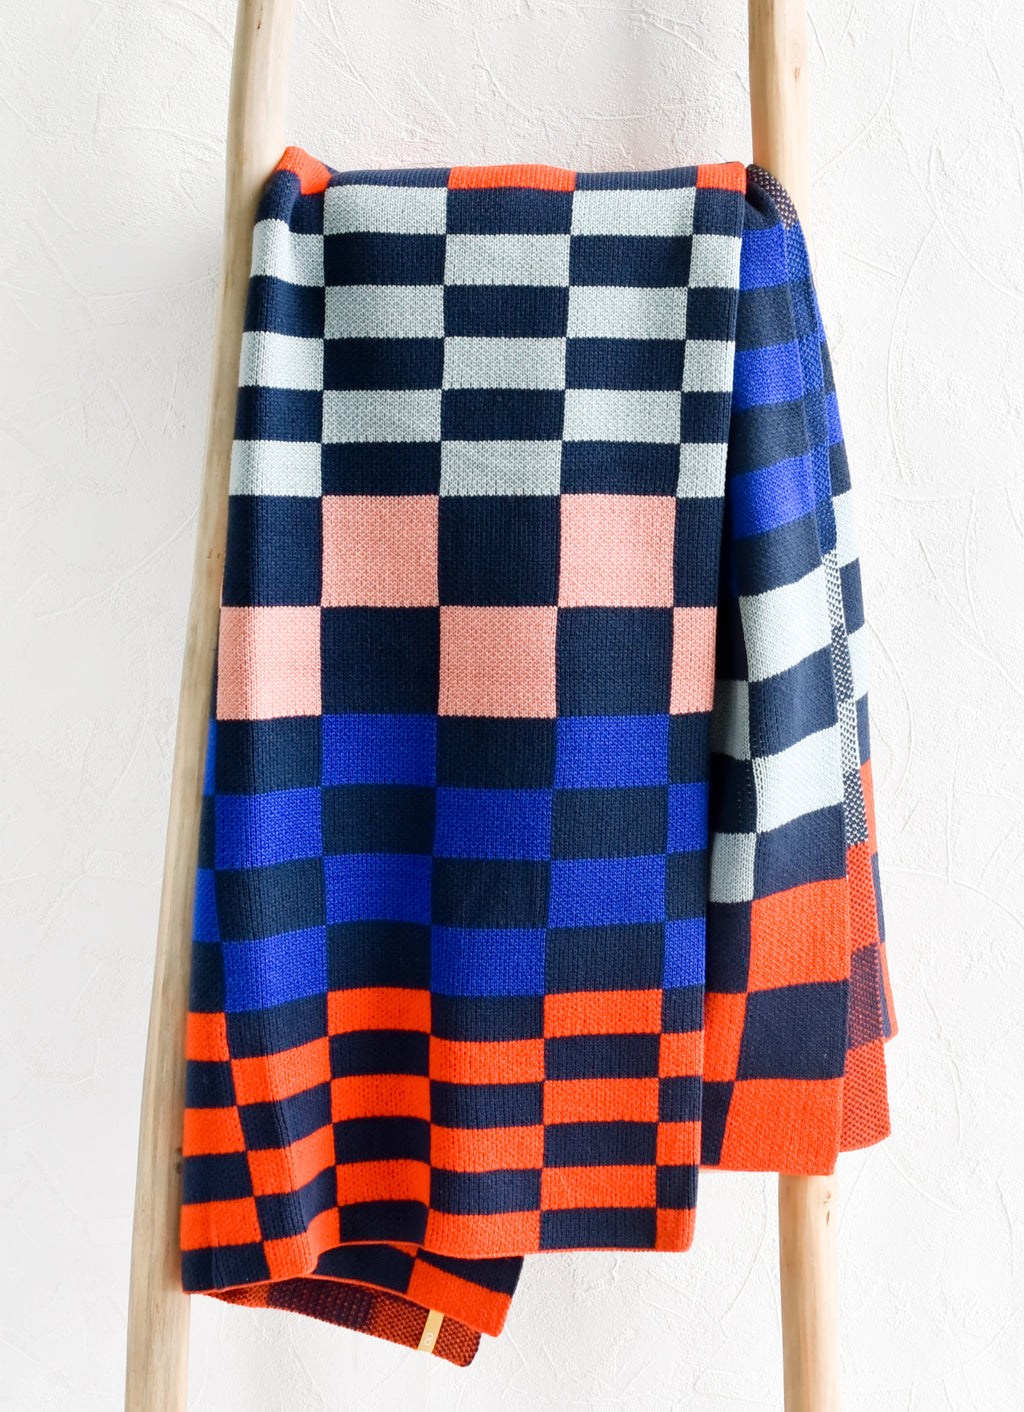 1: A knit throw blanket in checker print pattern in navy, light blue, royal blue, pink and orange.